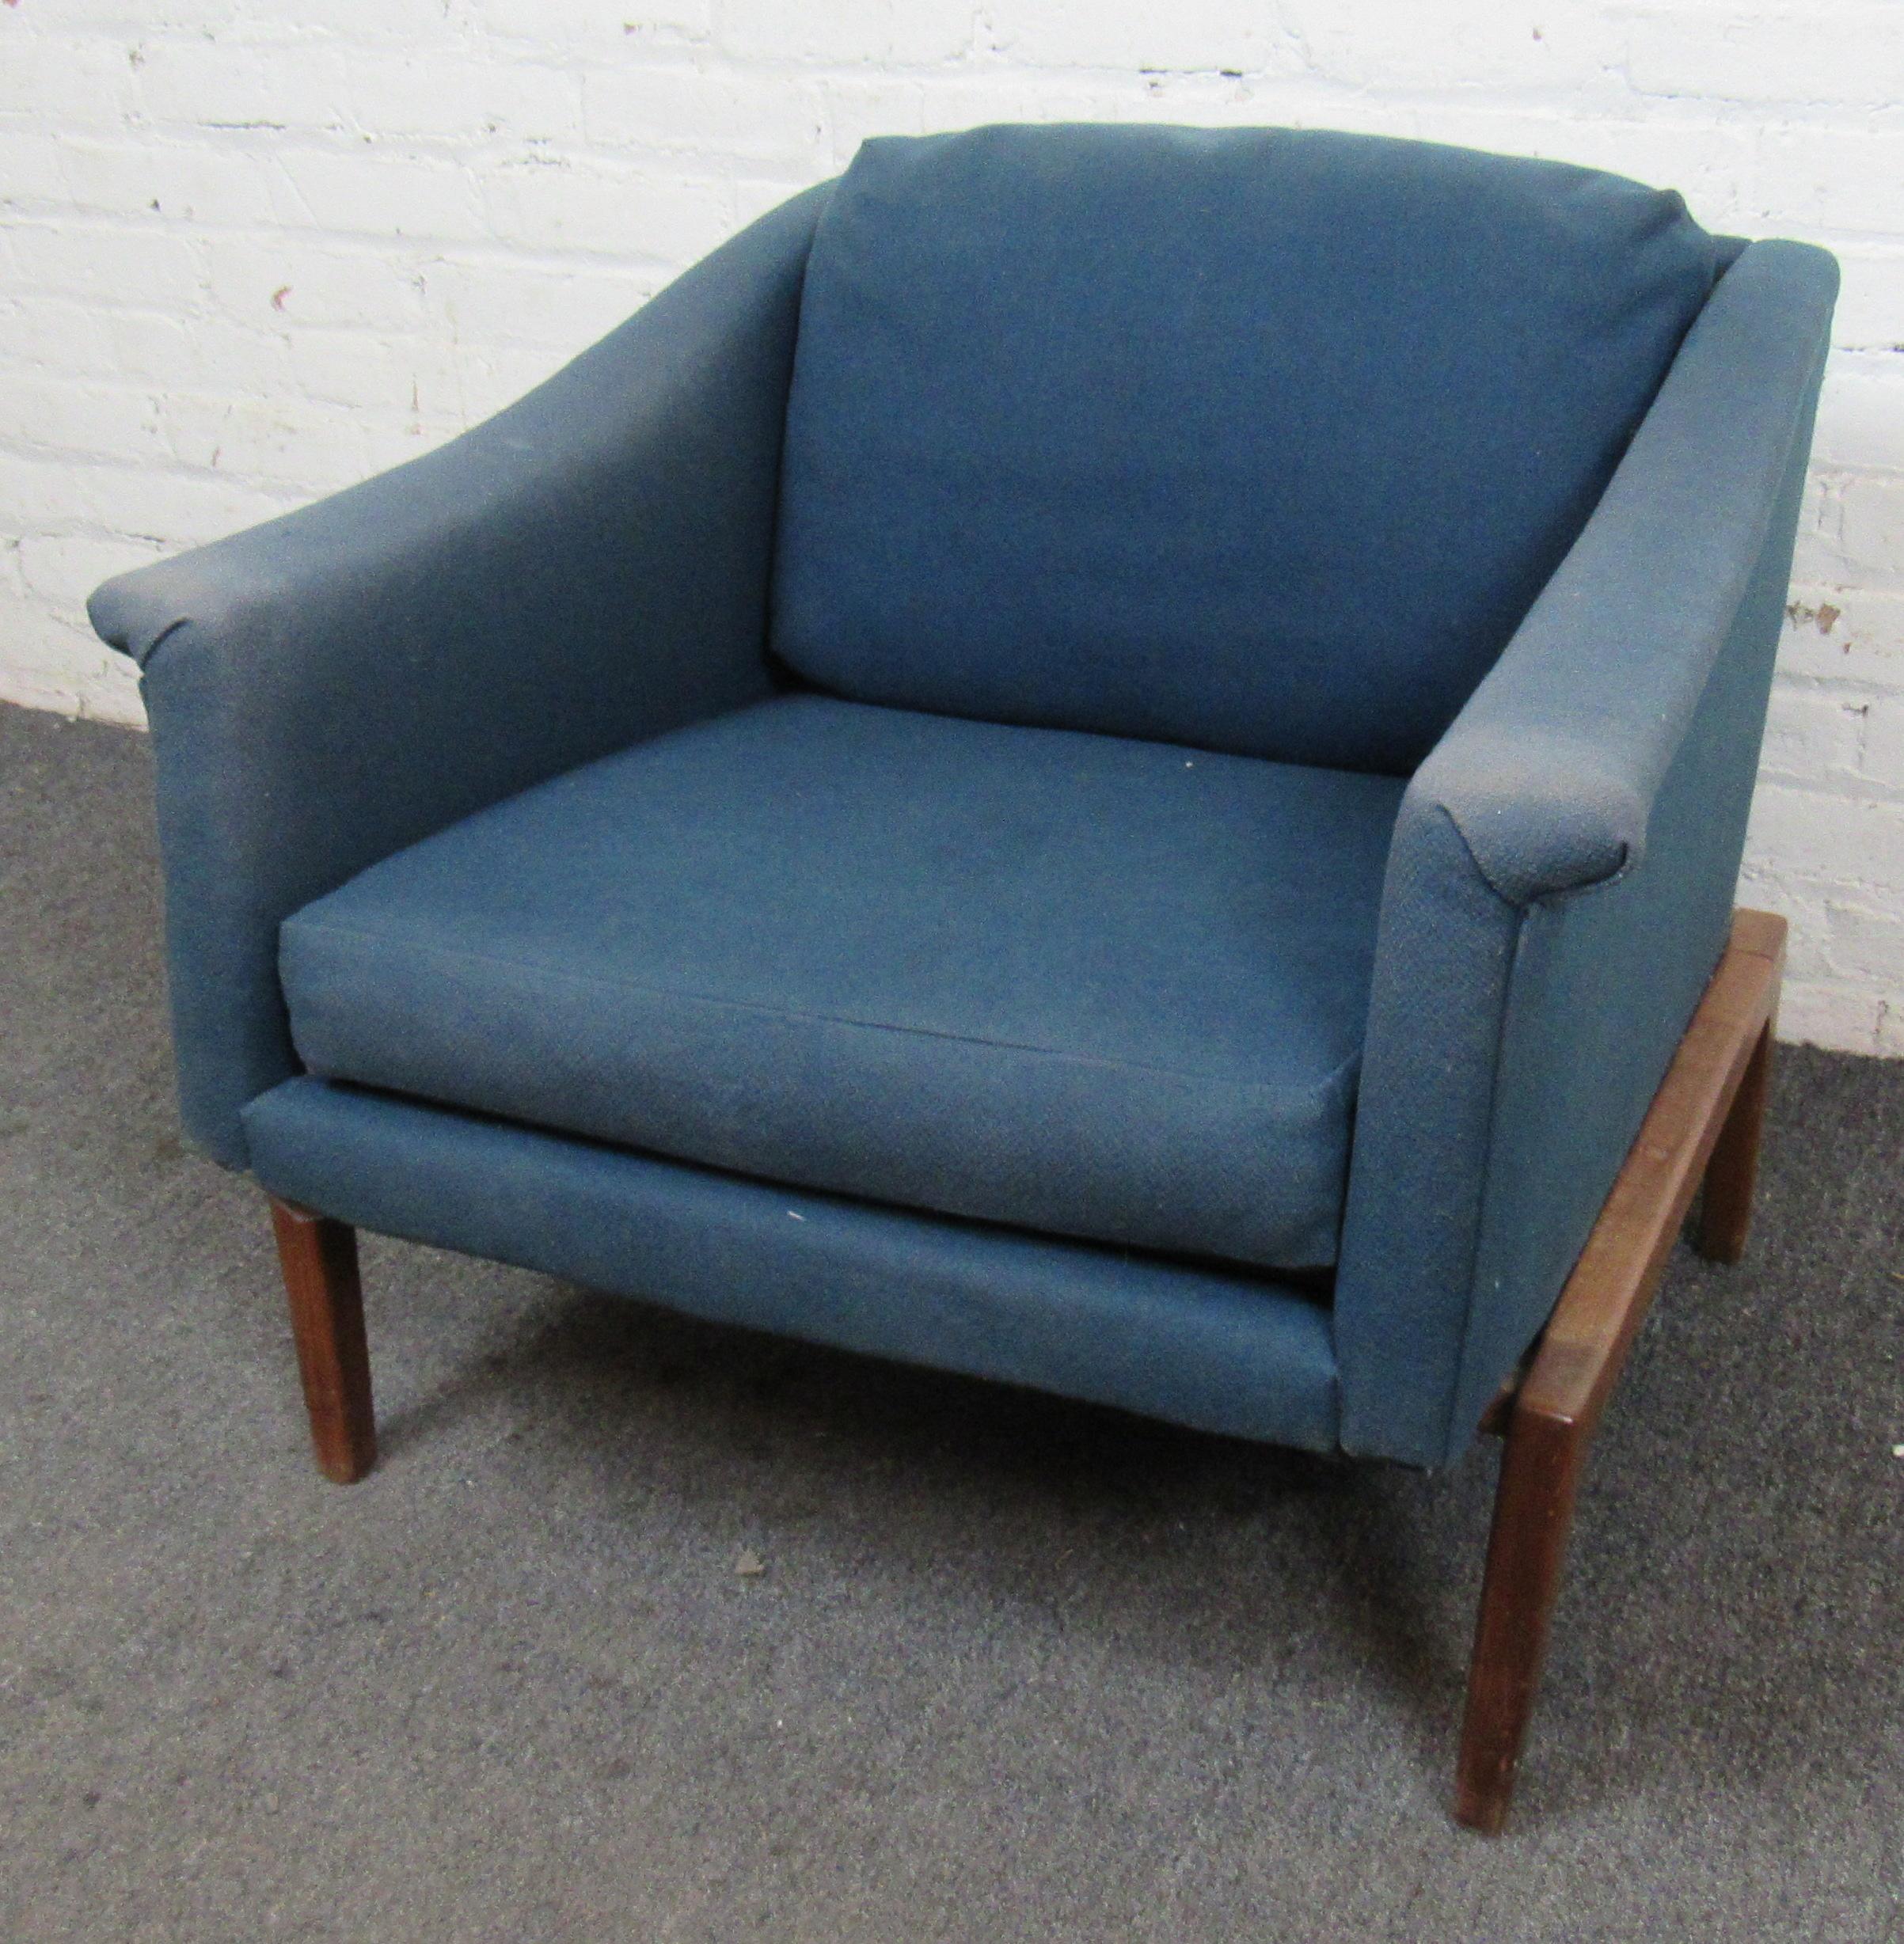 Low cube chair with blue fabric and wood frame. Well constructed Mid-Century Modern side chair for home or office.
Location: Brooklyn NY.